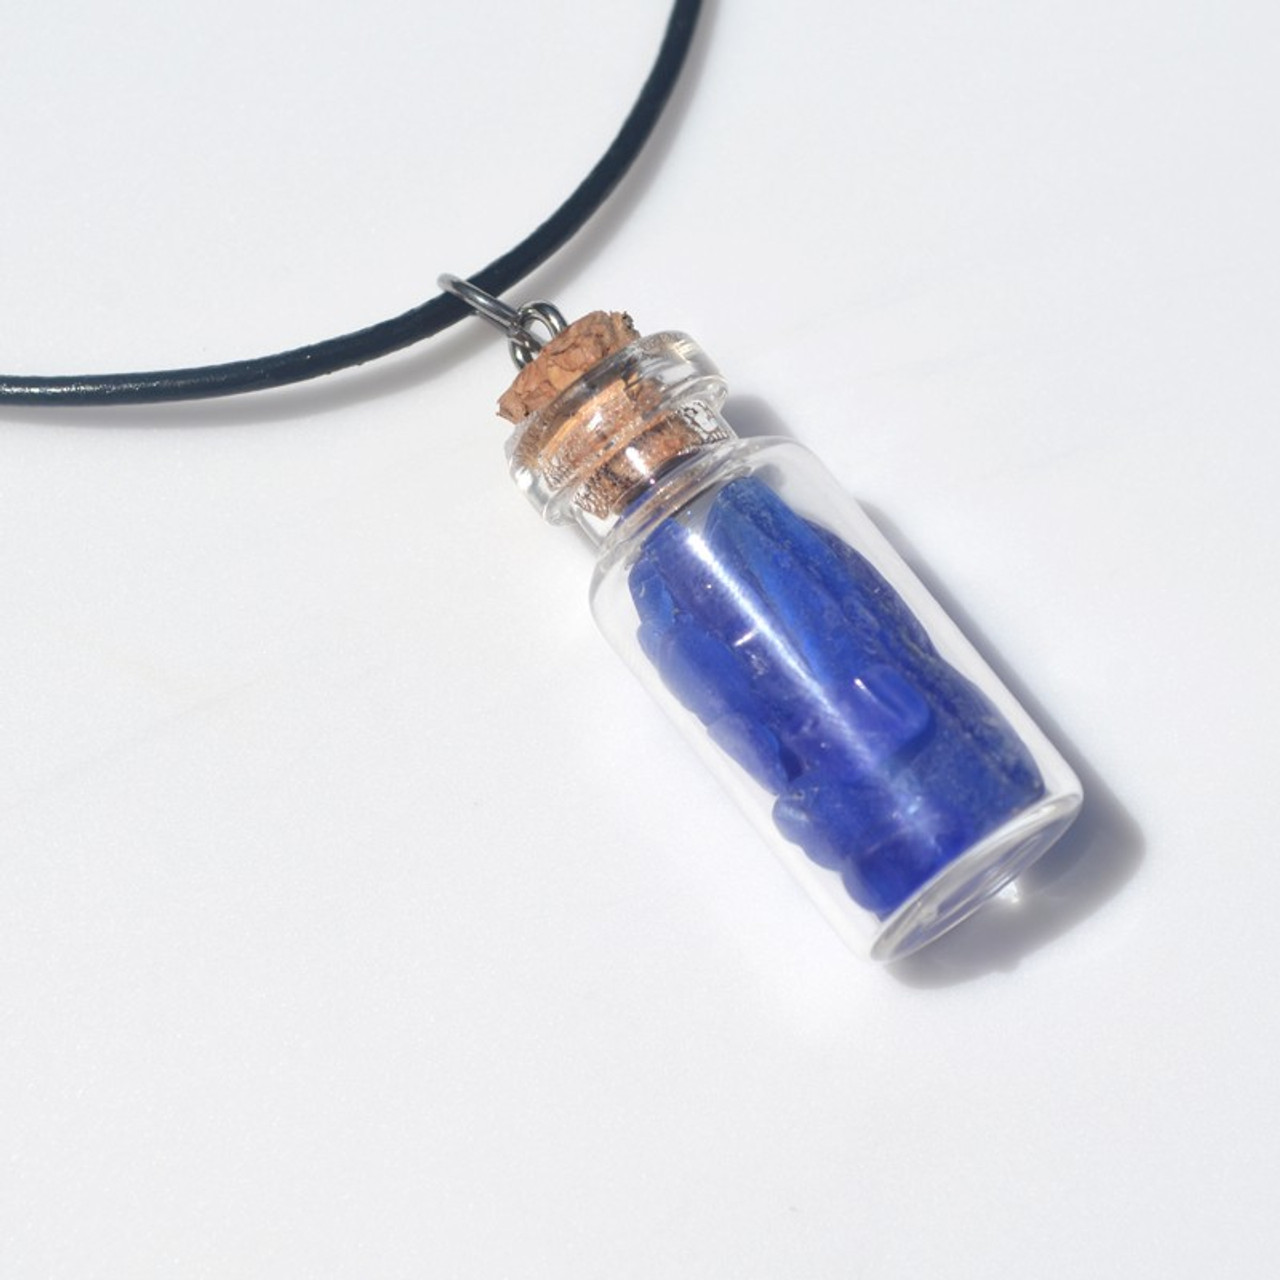 Frosted Blue Sea Glass Necklace in a Glass Vial on a Leather Cord - Made to Order